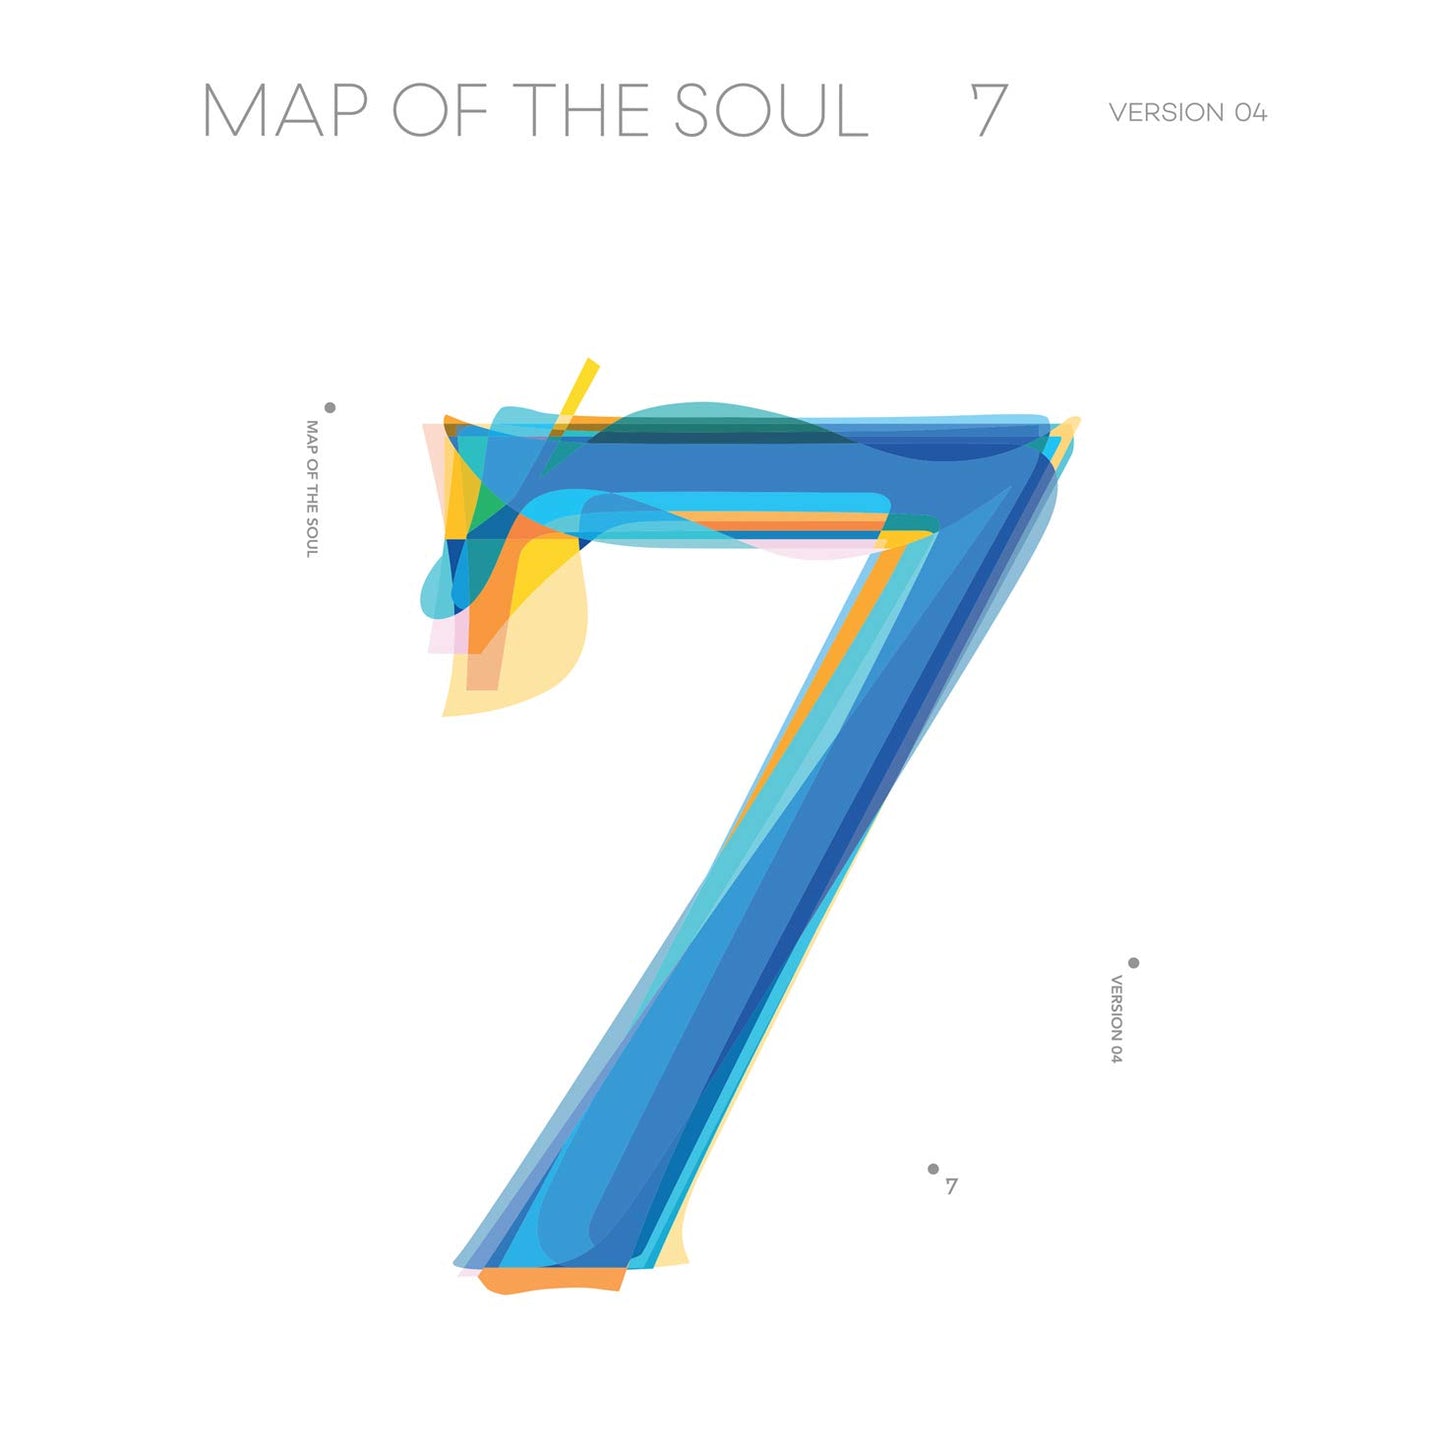 BTS - MAP OF THE SOUL 7